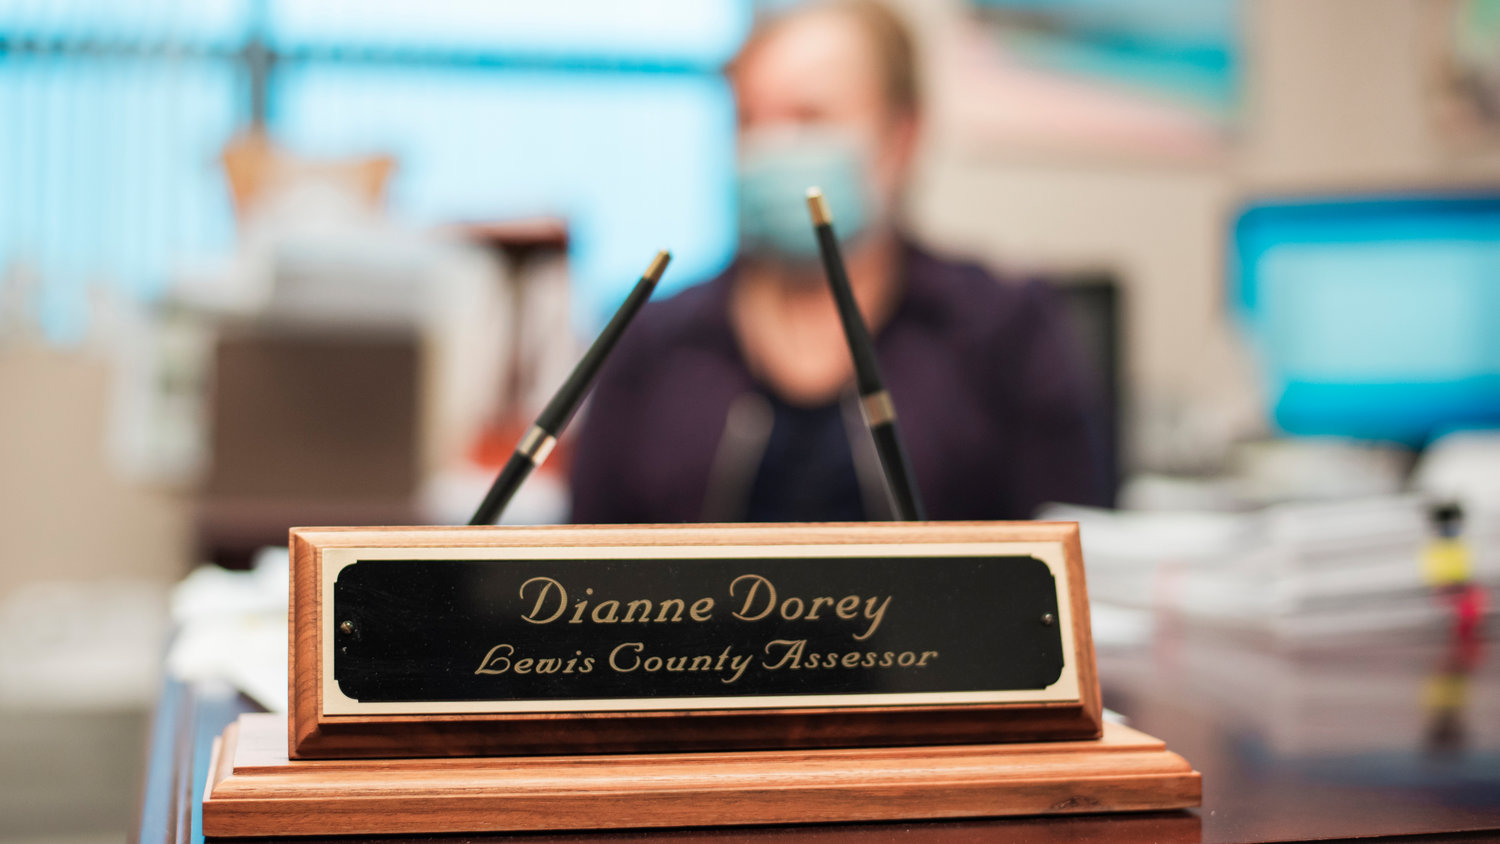 A plaque reads "Dianne Dorey Lewis County Assessor" at the Lewis County Courthouse.